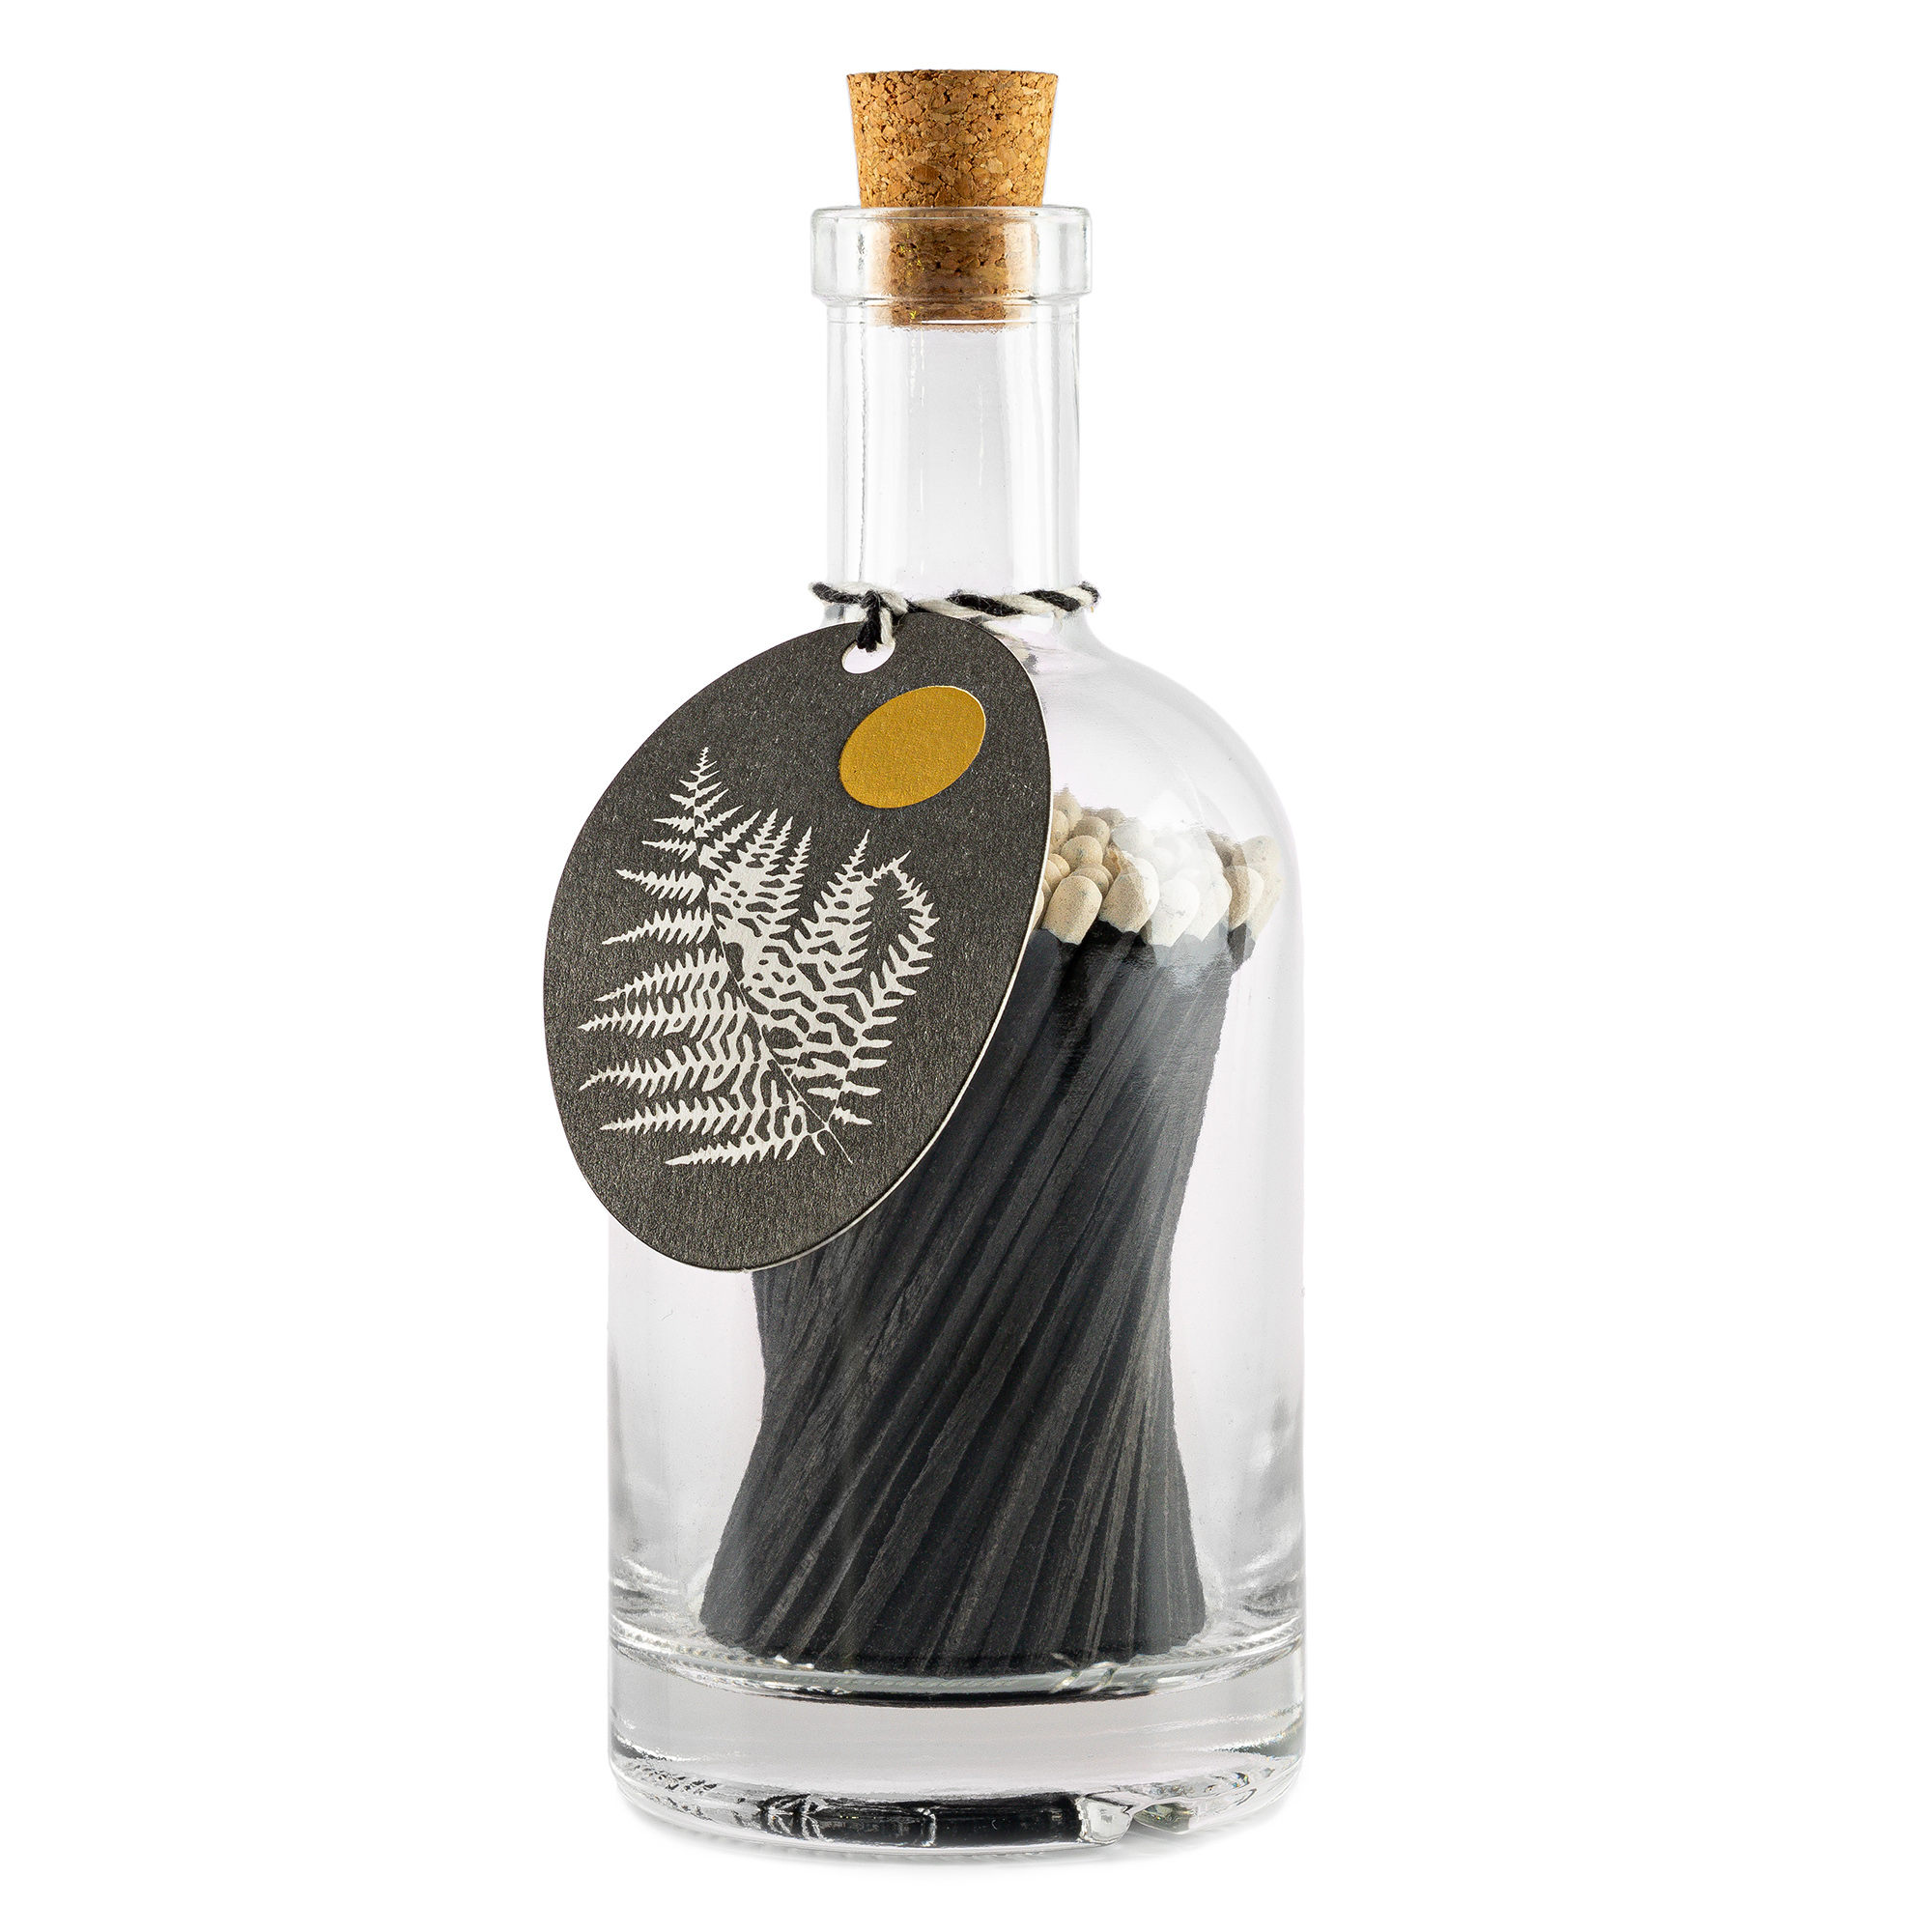 Black Fern - Match Bottles - Real, Fun, Wow! - from Archivist Gallery 